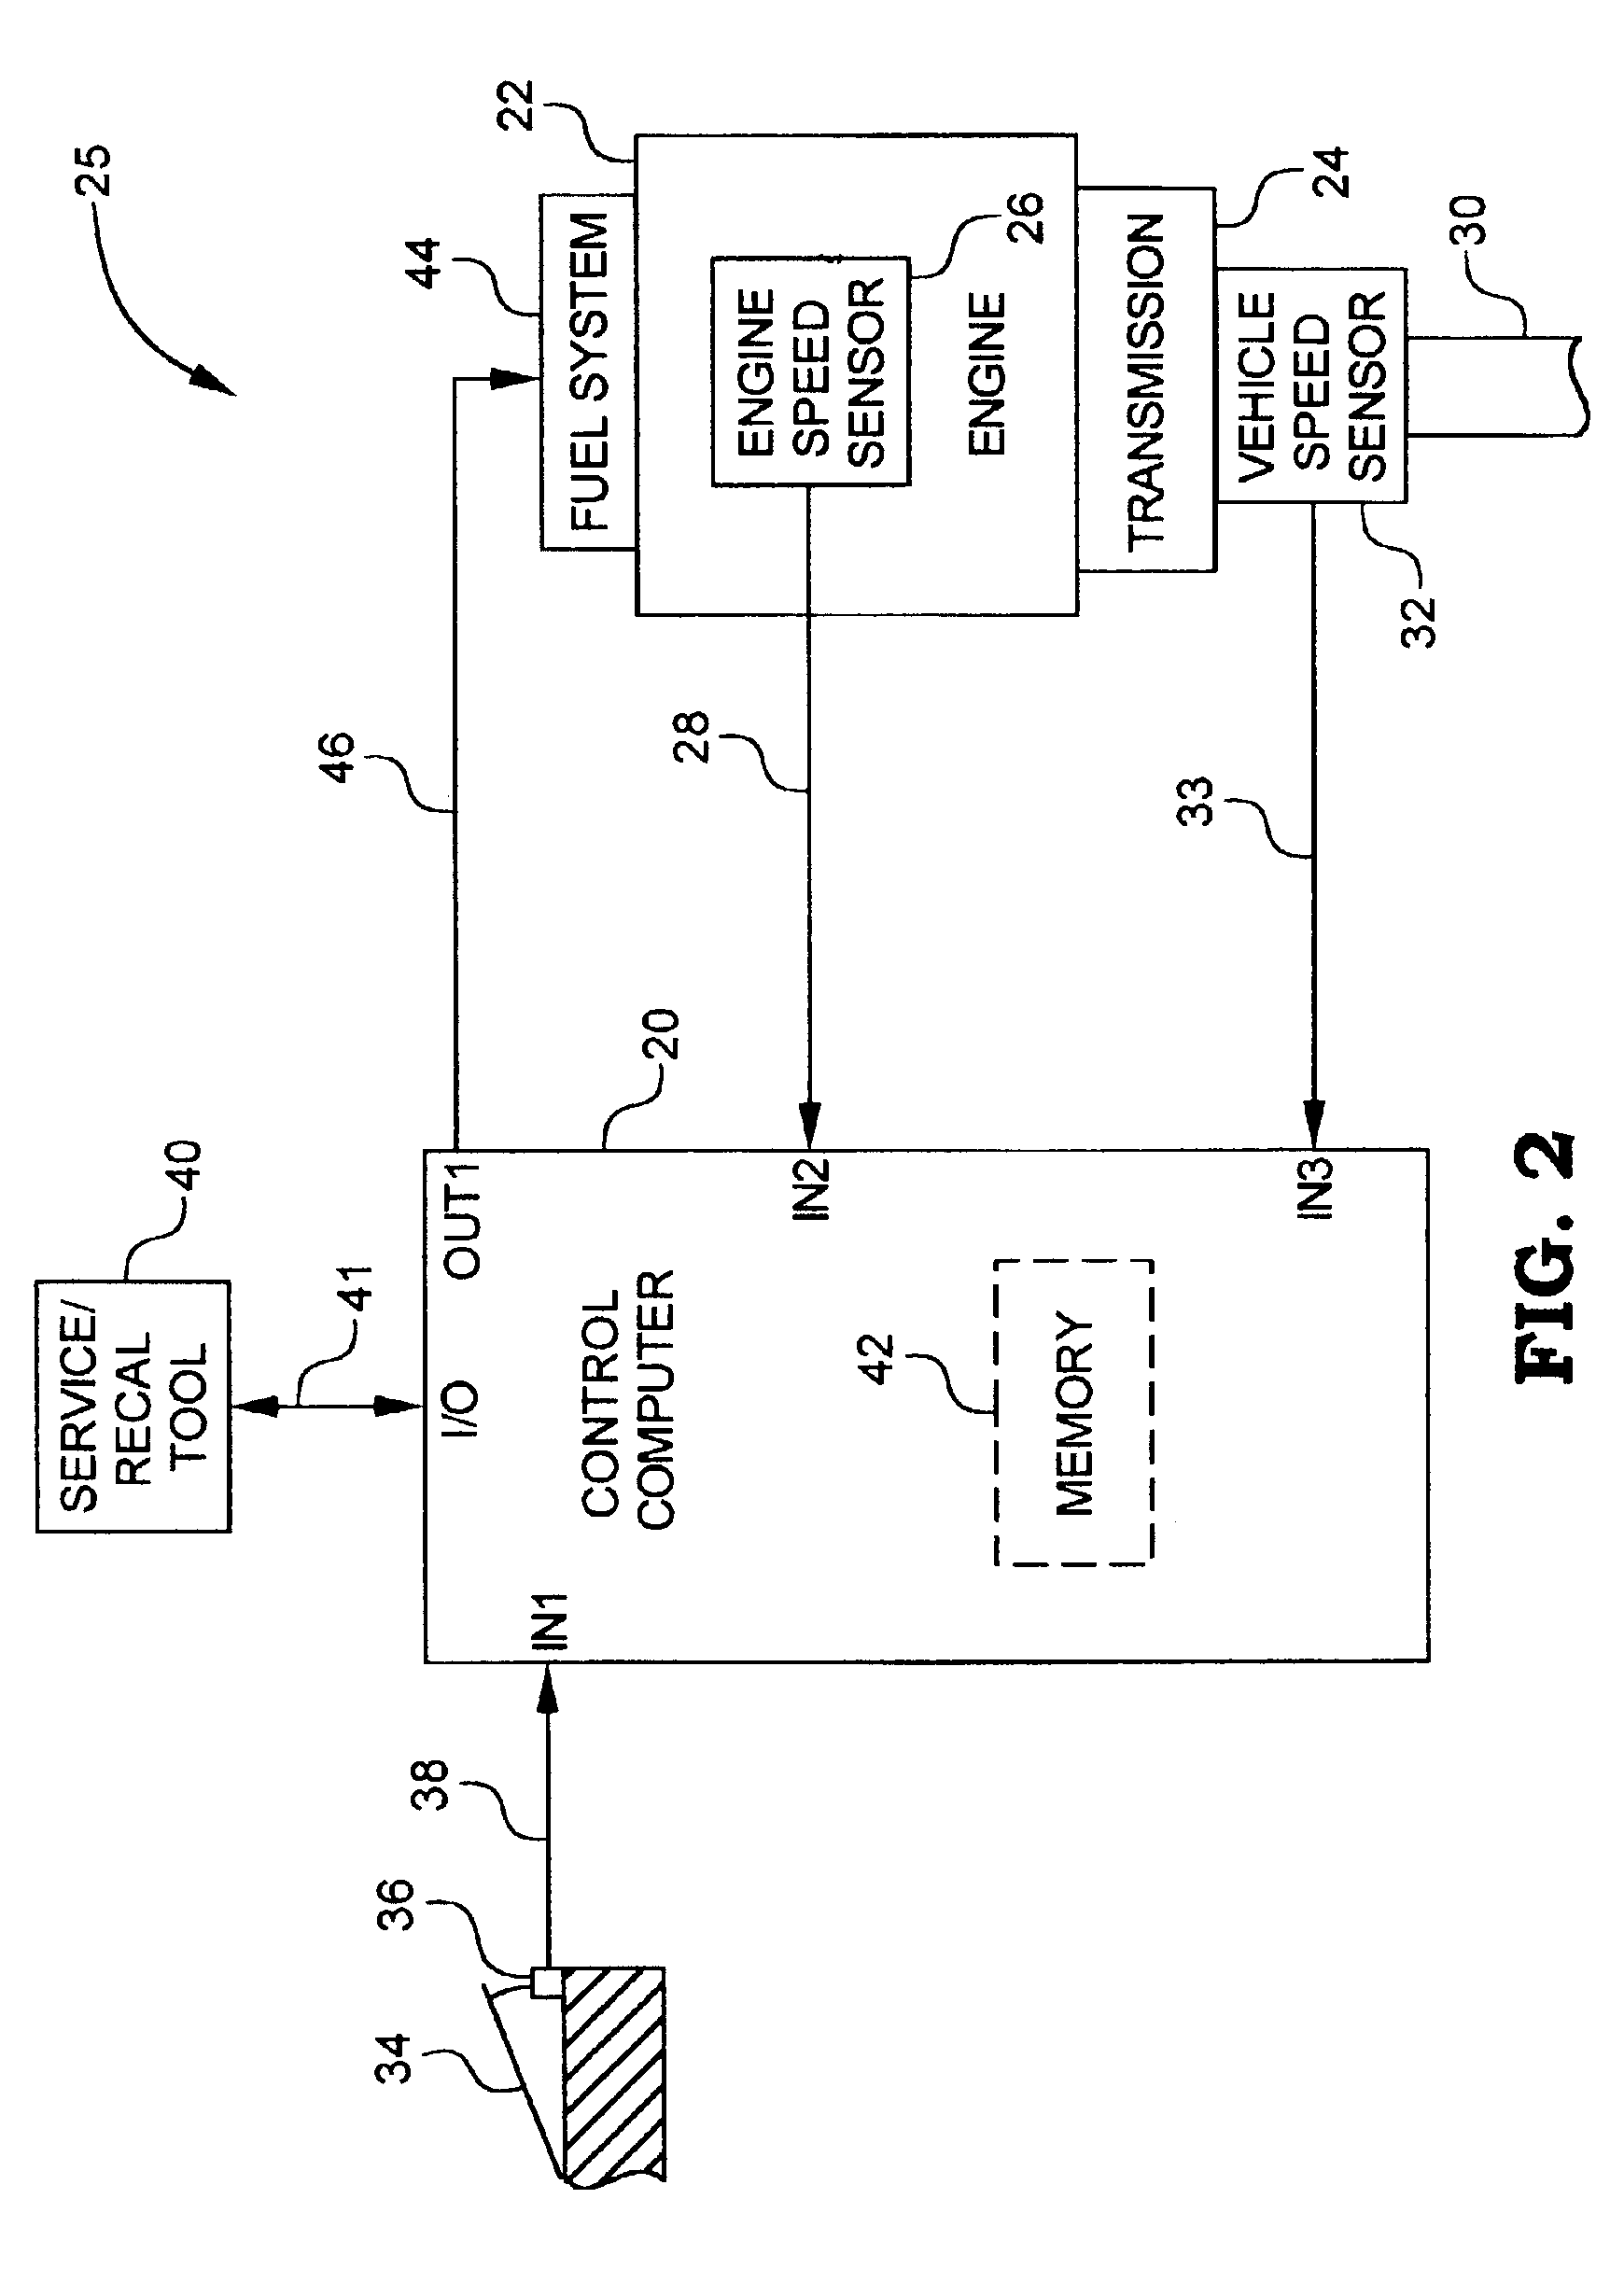 System for controlling an internal combustion engine in a fuel efficient manner